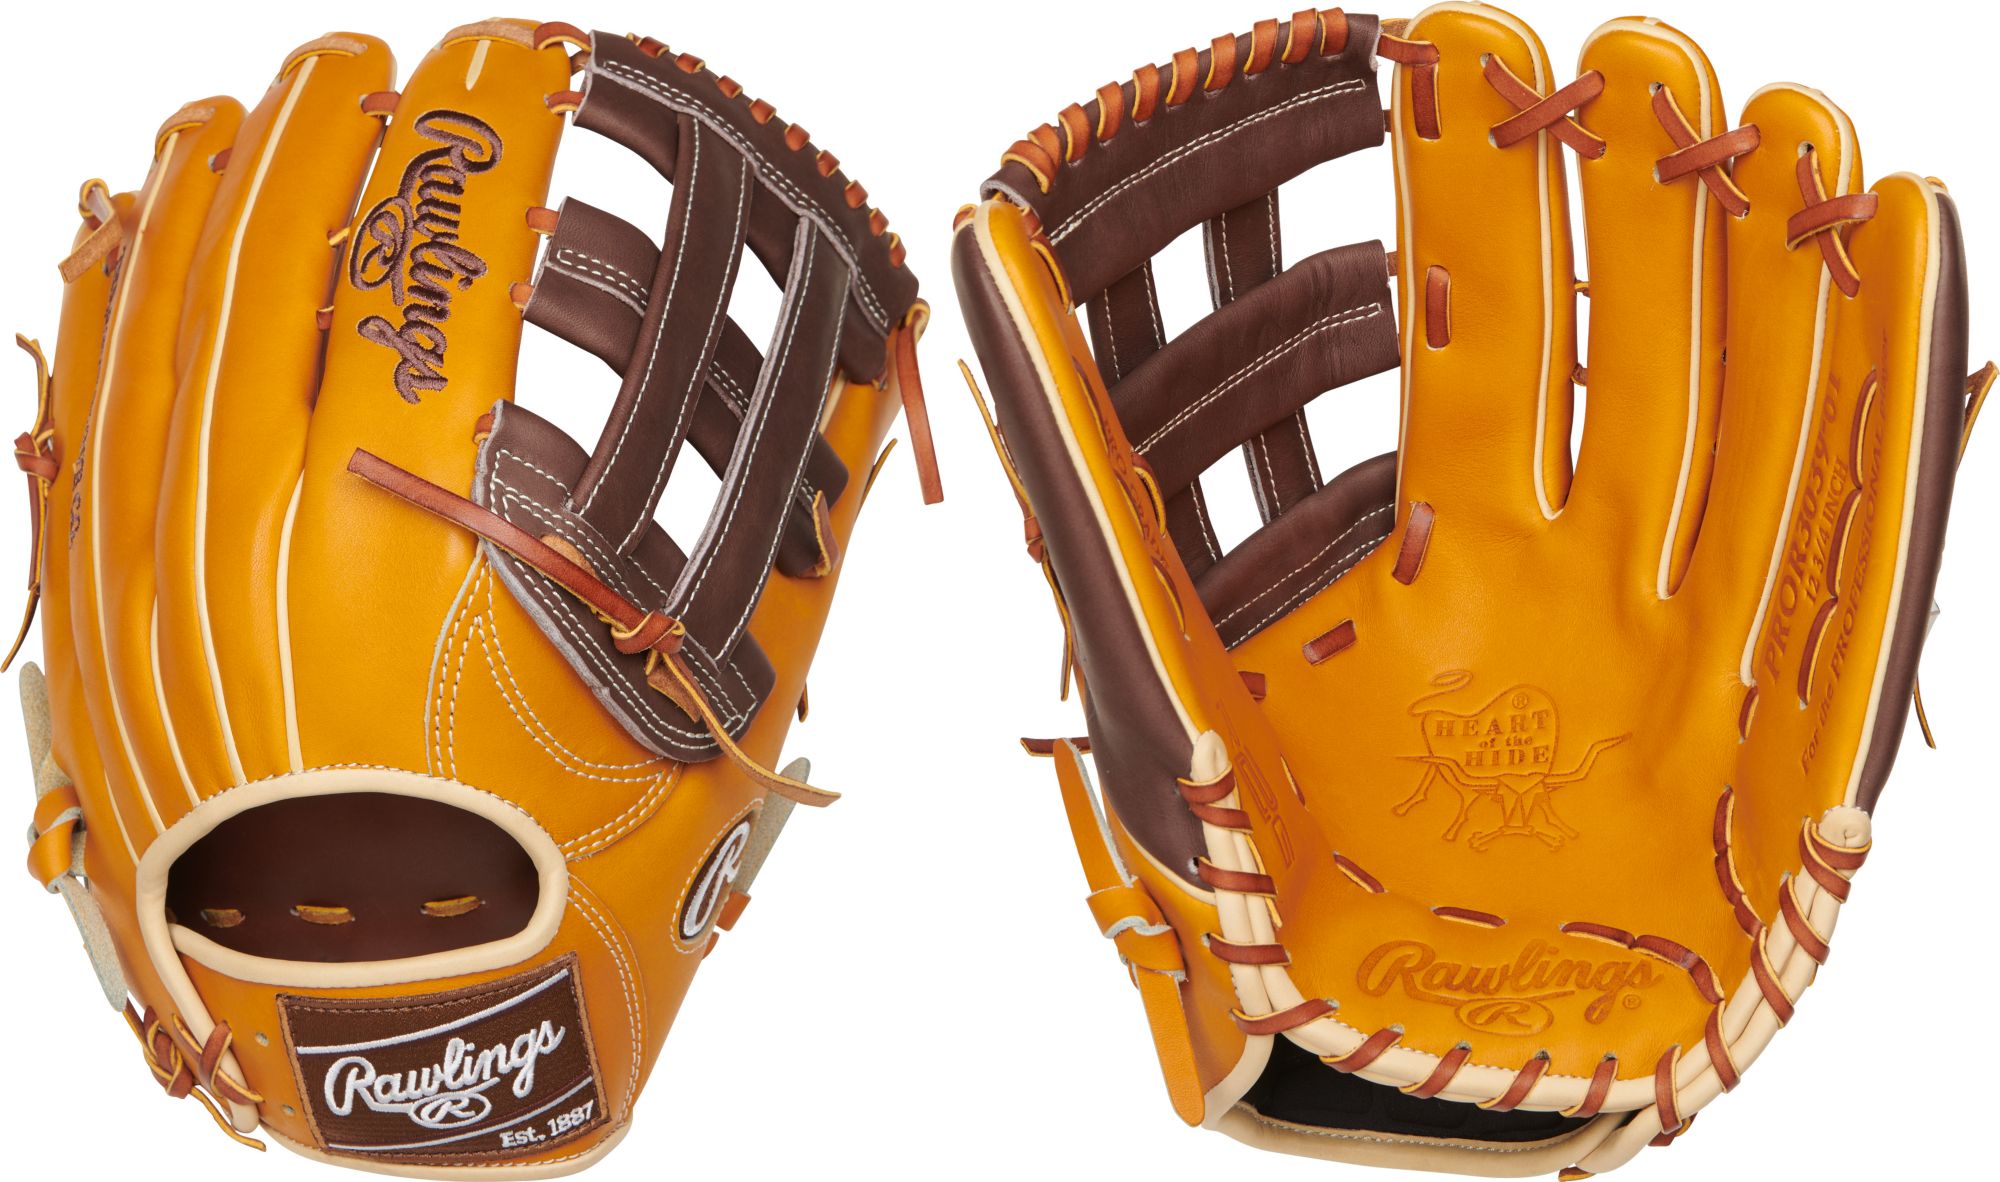 NWT PROR3039-6T 12 3/4” Baseball Glove Heart Of The Hide/RTG Details about   Rawlings 